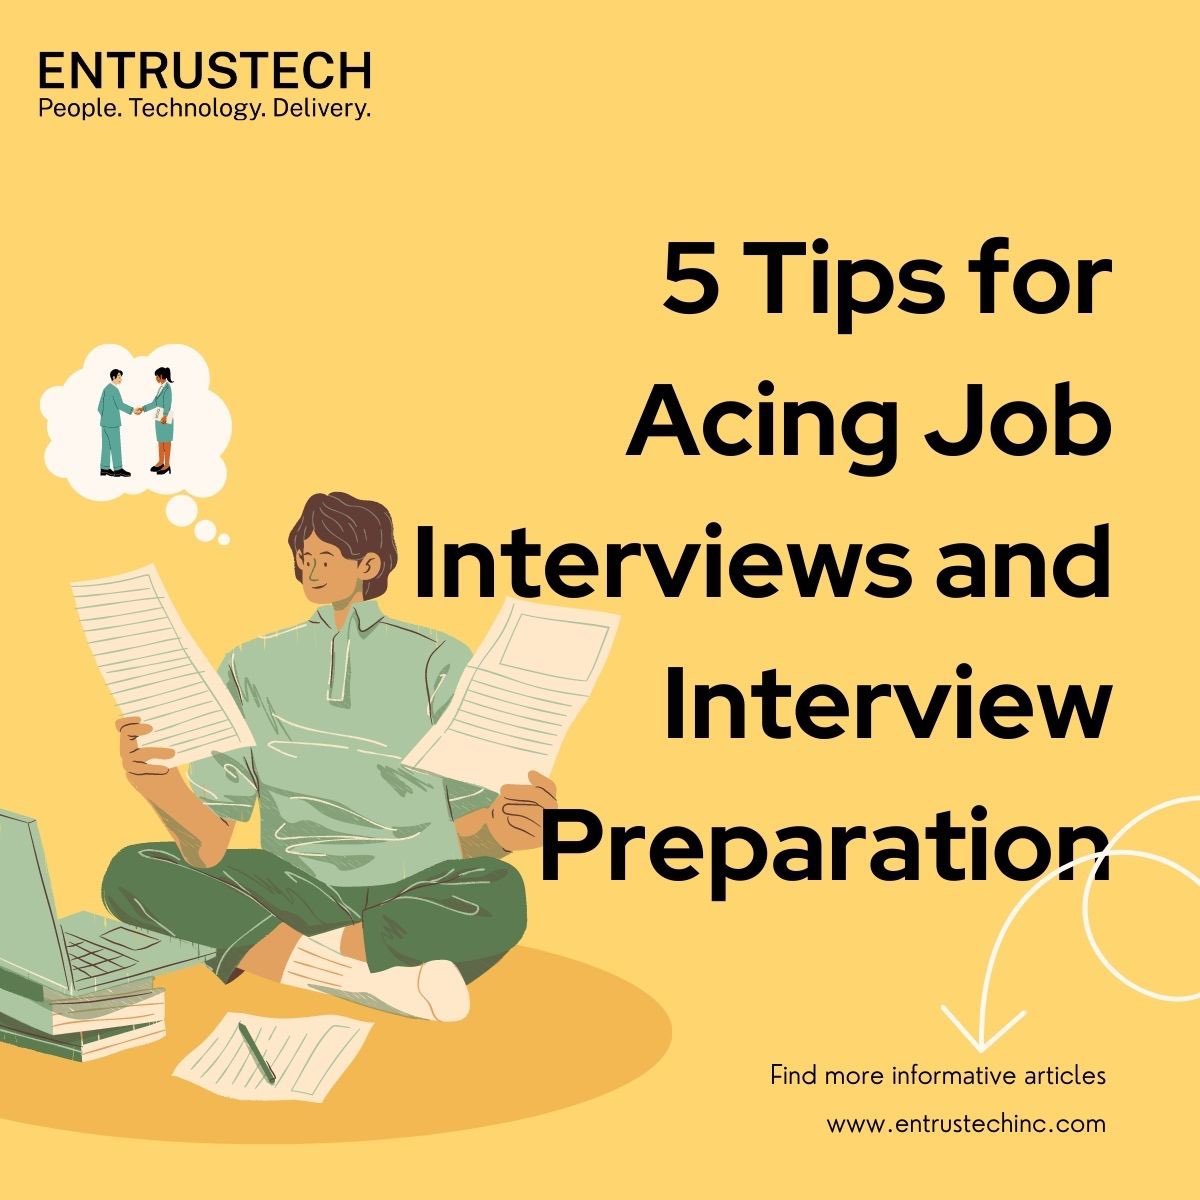 🌟 Ace Your Job Interviews with these Time-Tested Tips! 🌟
🚀🔥 #interviewtips  #careeradvice  #entrustech #jobopportunities  #interview #recruitment #career #content #staffing #leaders #jobinterviews #job #thread